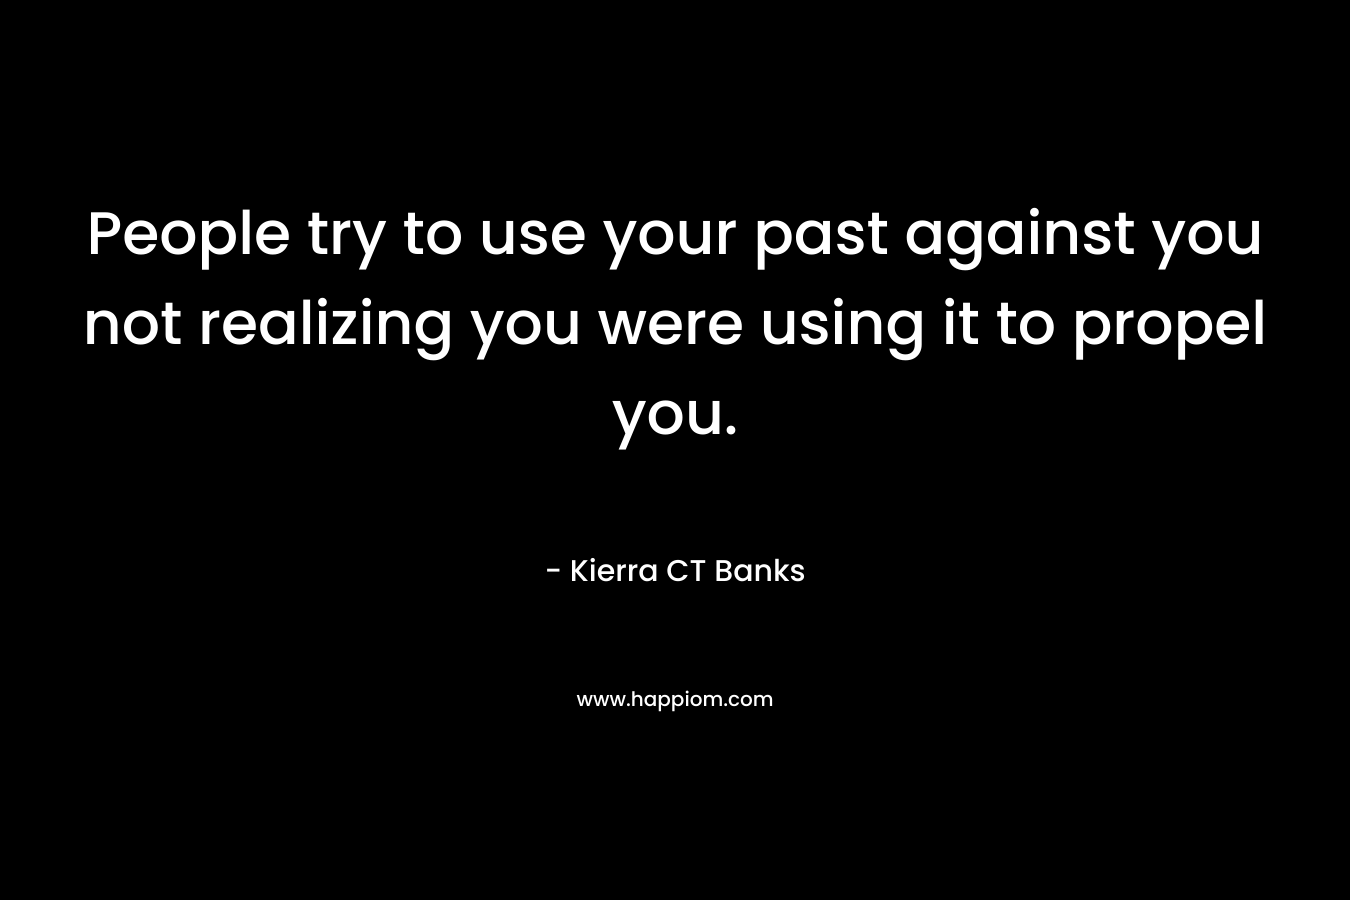 People try to use your past against you not realizing you were using it to propel you.